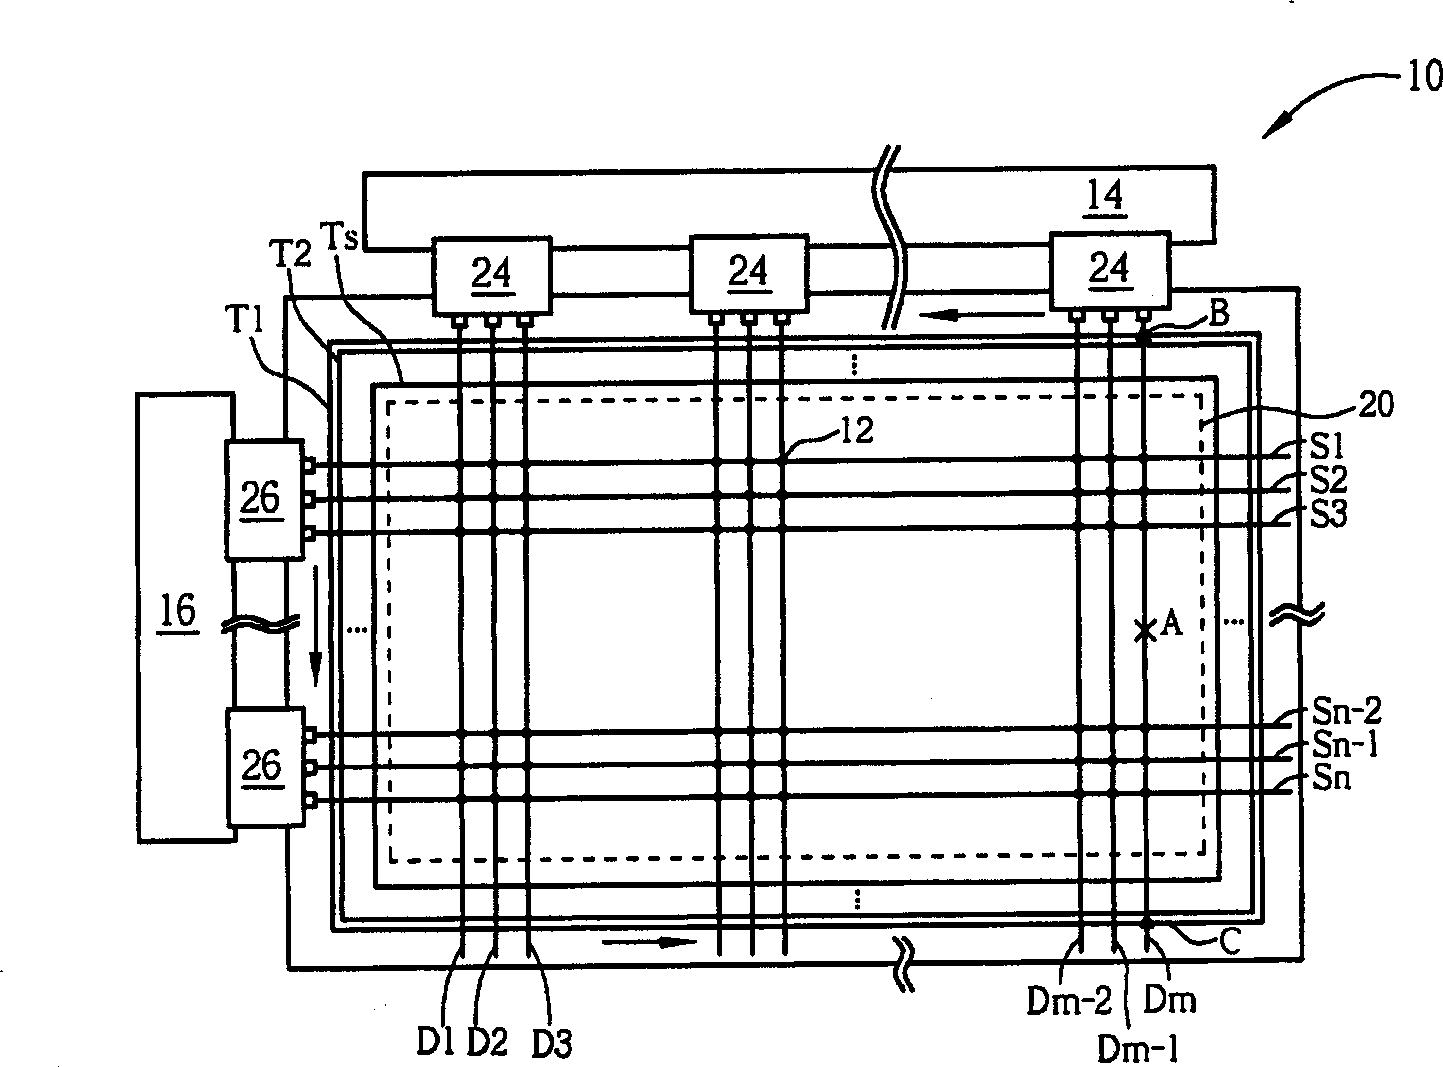 Display panel with repairing line and signal line set on differential substrates